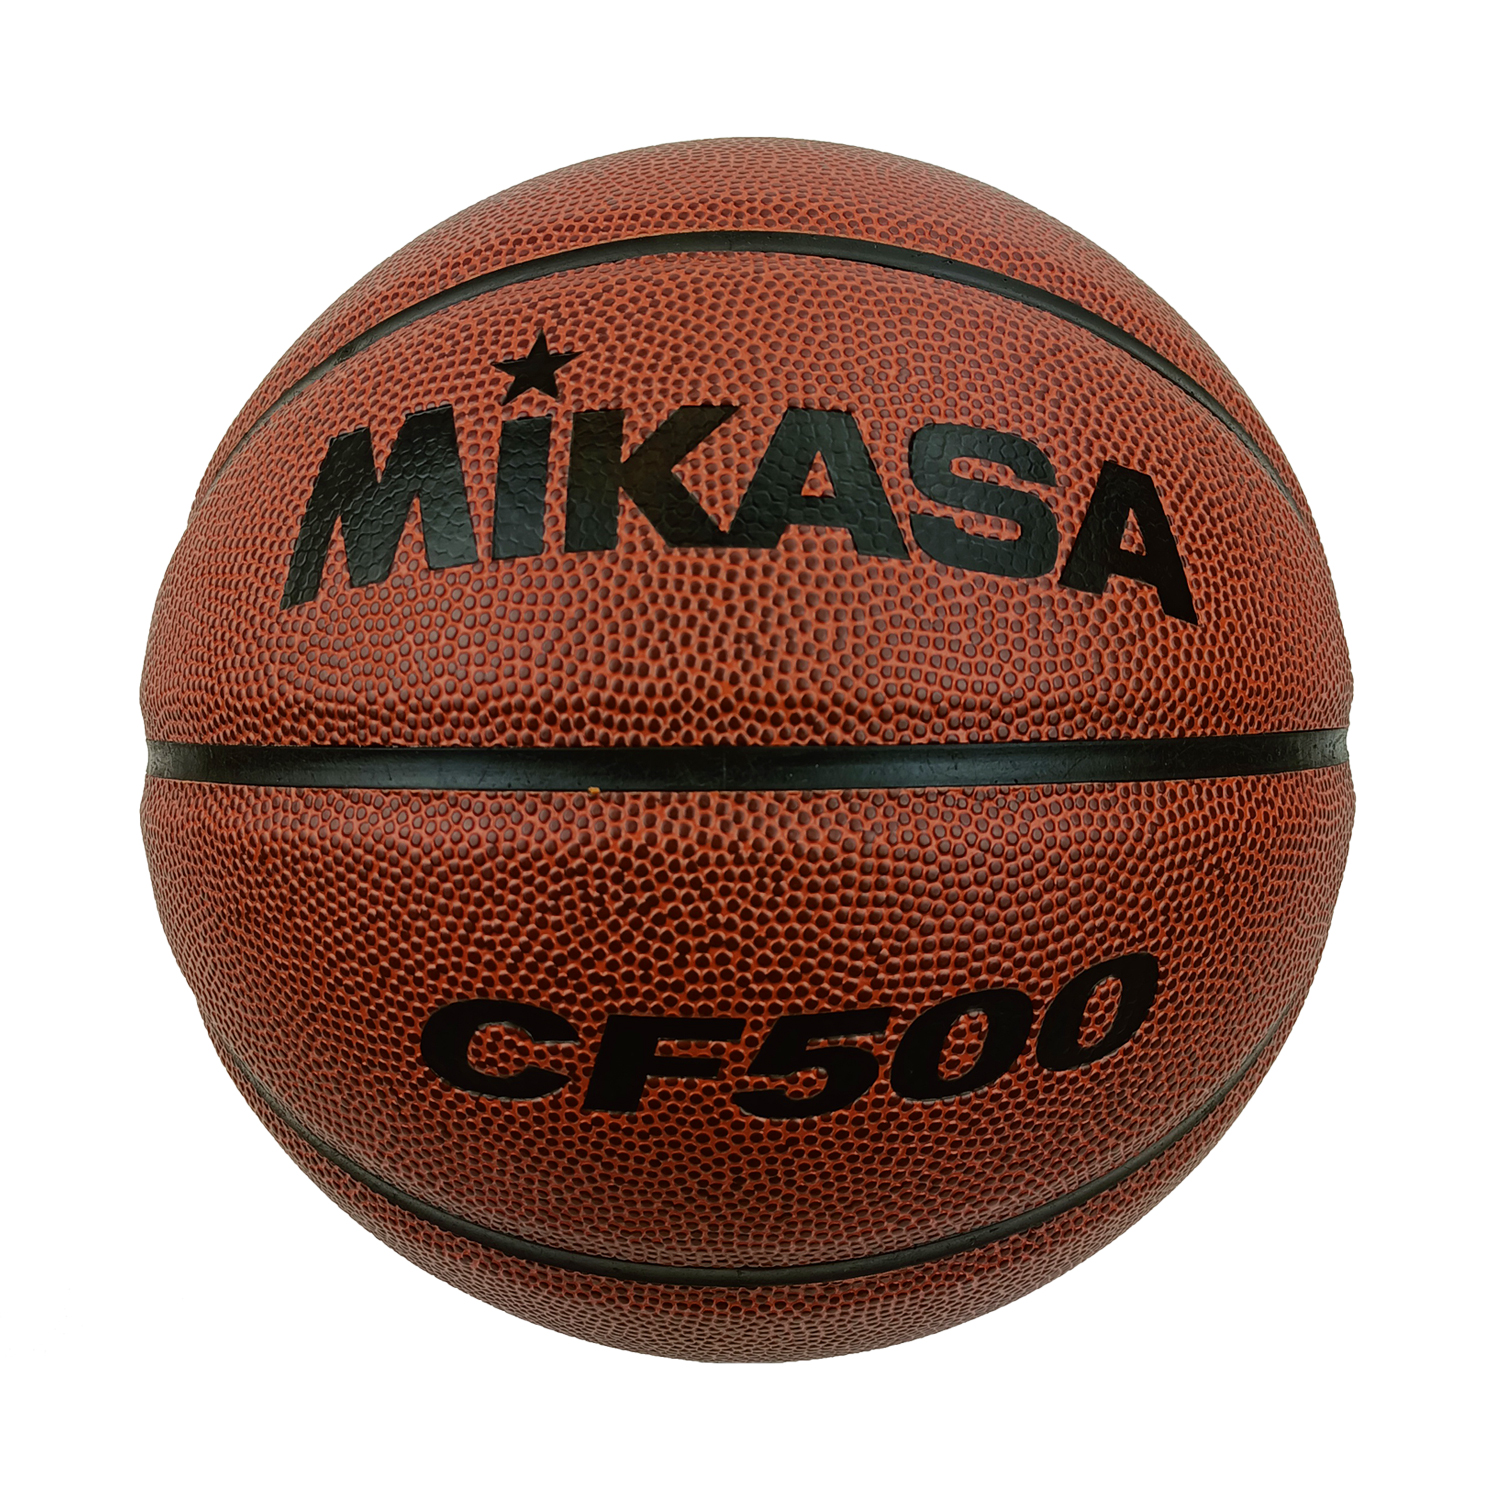 MIKASA CF500 BASKETBALL HIGH GRADE SYNTHETIC LEATHER SIZE 5